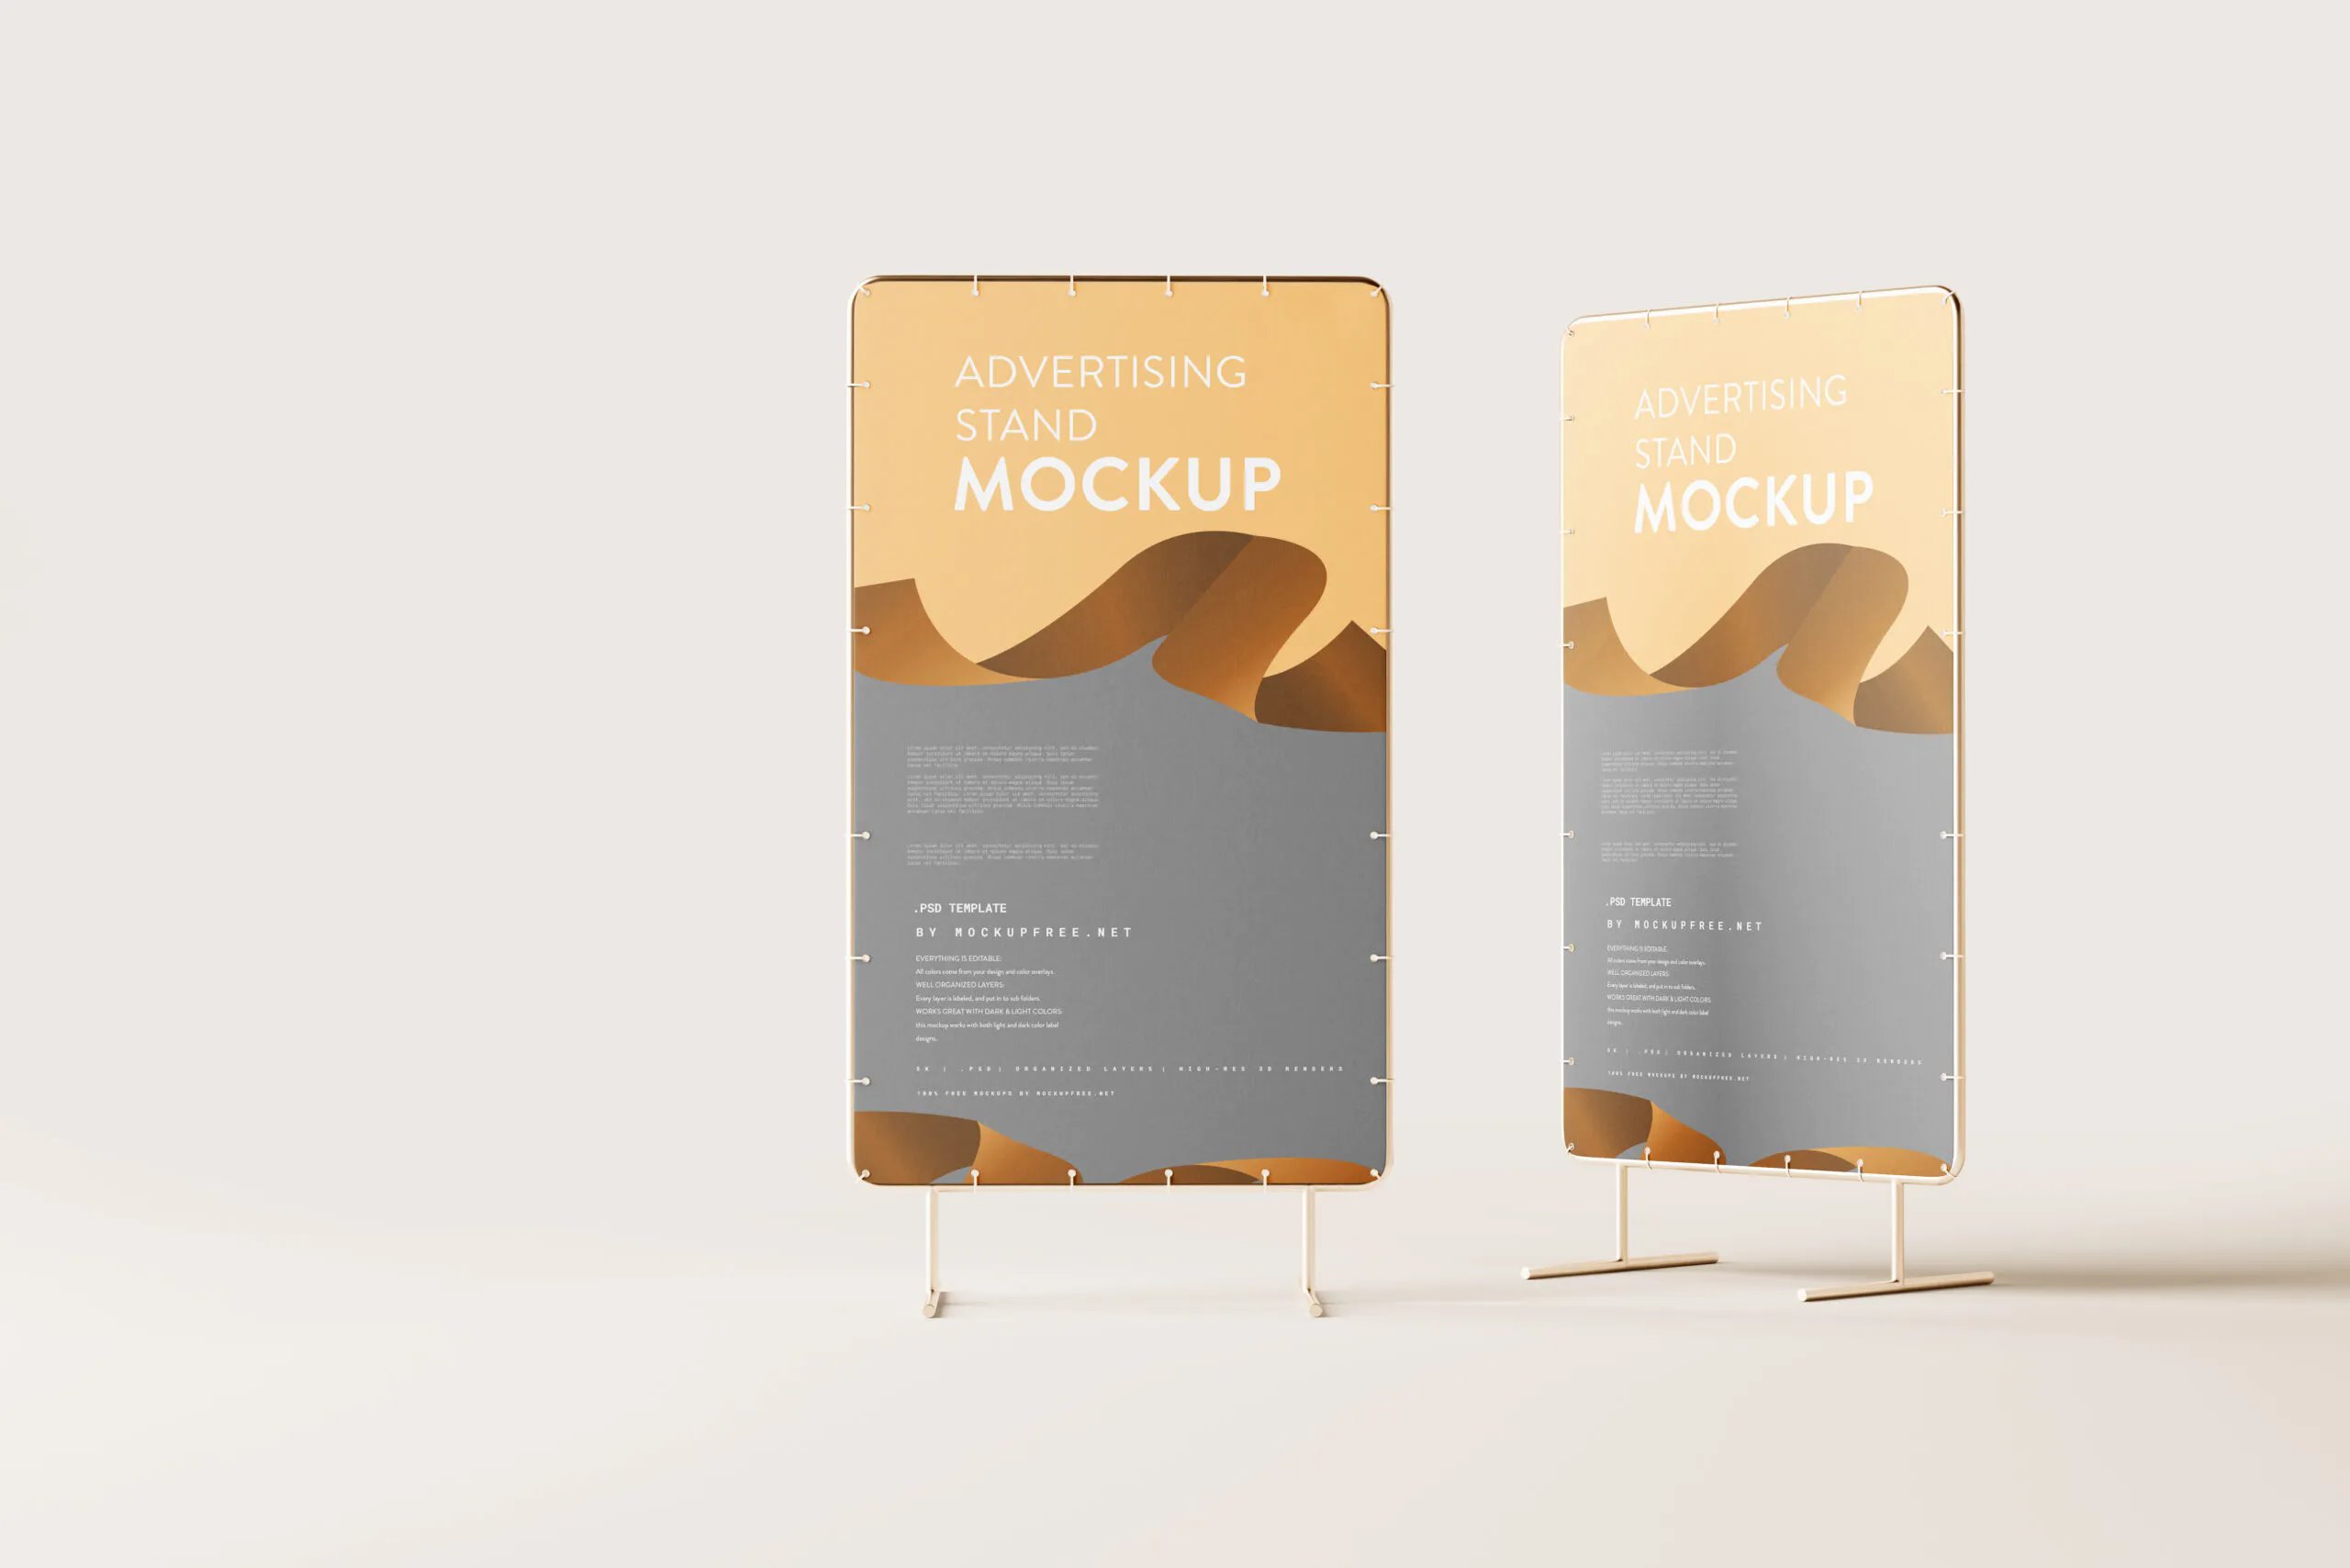 5 Shots of Advertising Stand Mockup FREE PSD